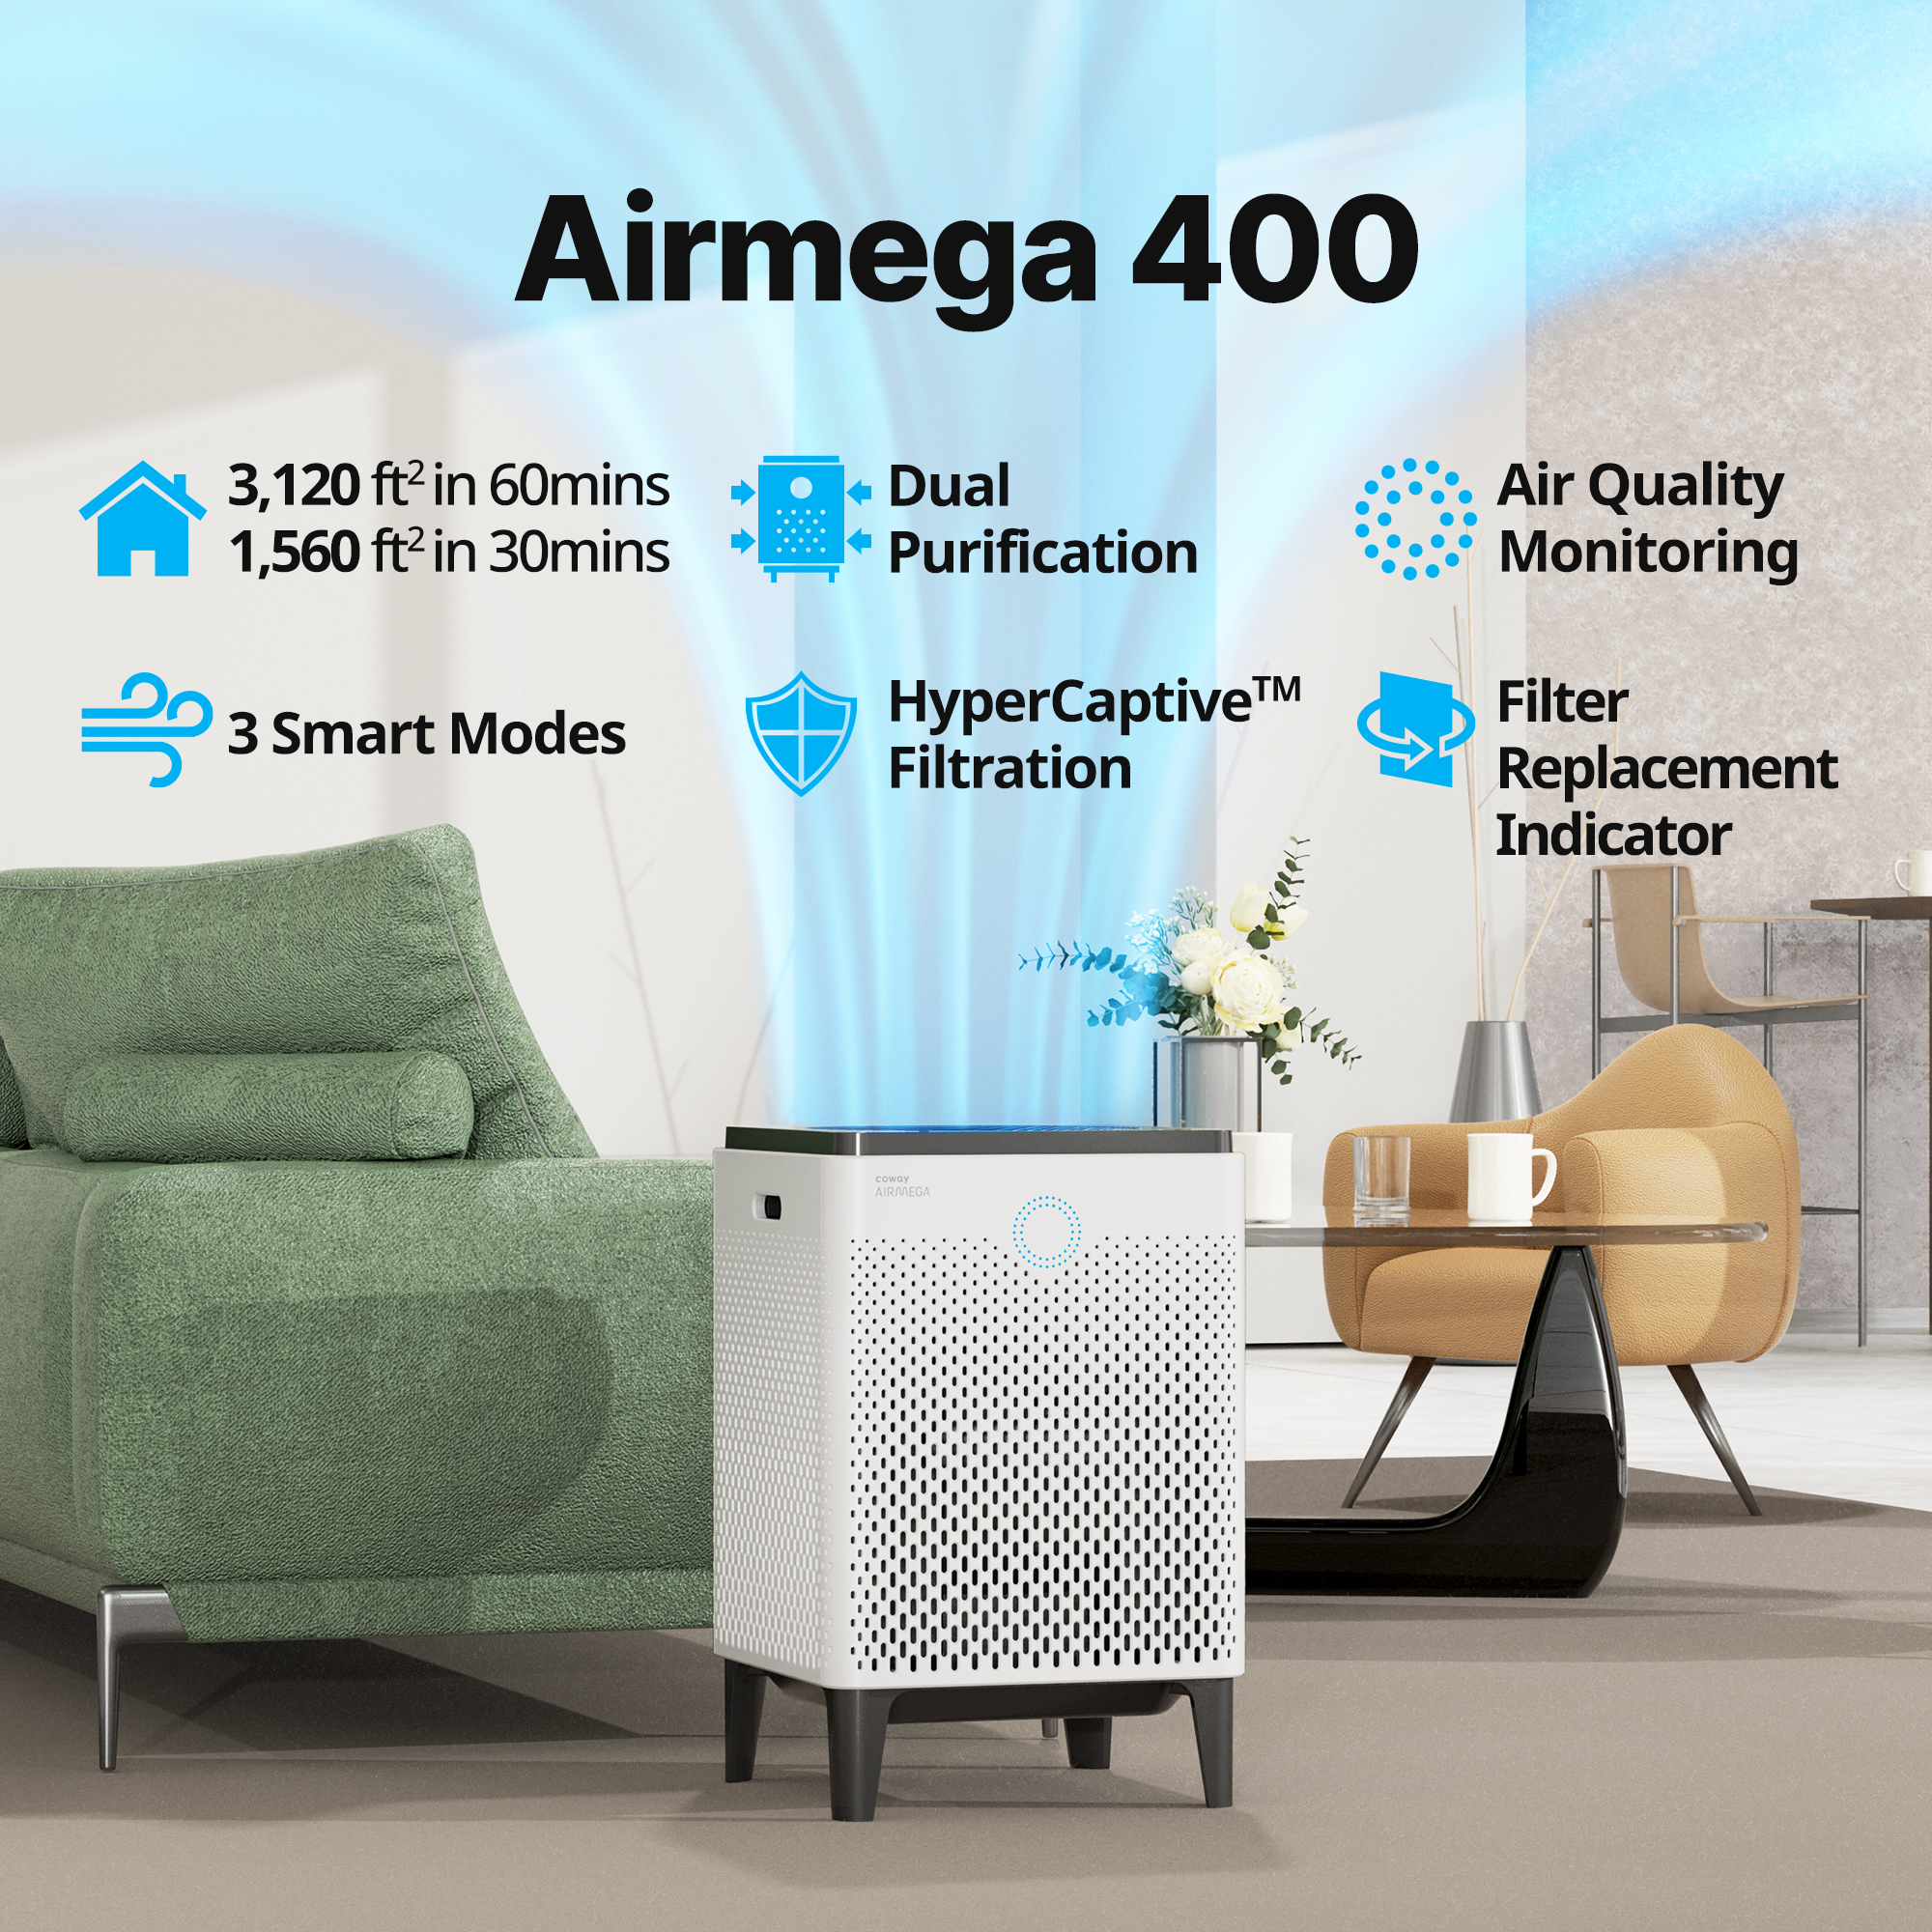 Coway Air Purifier Airmega 400 White True HEPA Air Purifier with 1560 sq ft Coverage, Auto, Eco, & Sleep Mode, Air Quality & Filter Replacement Indicator - image 2 of 7